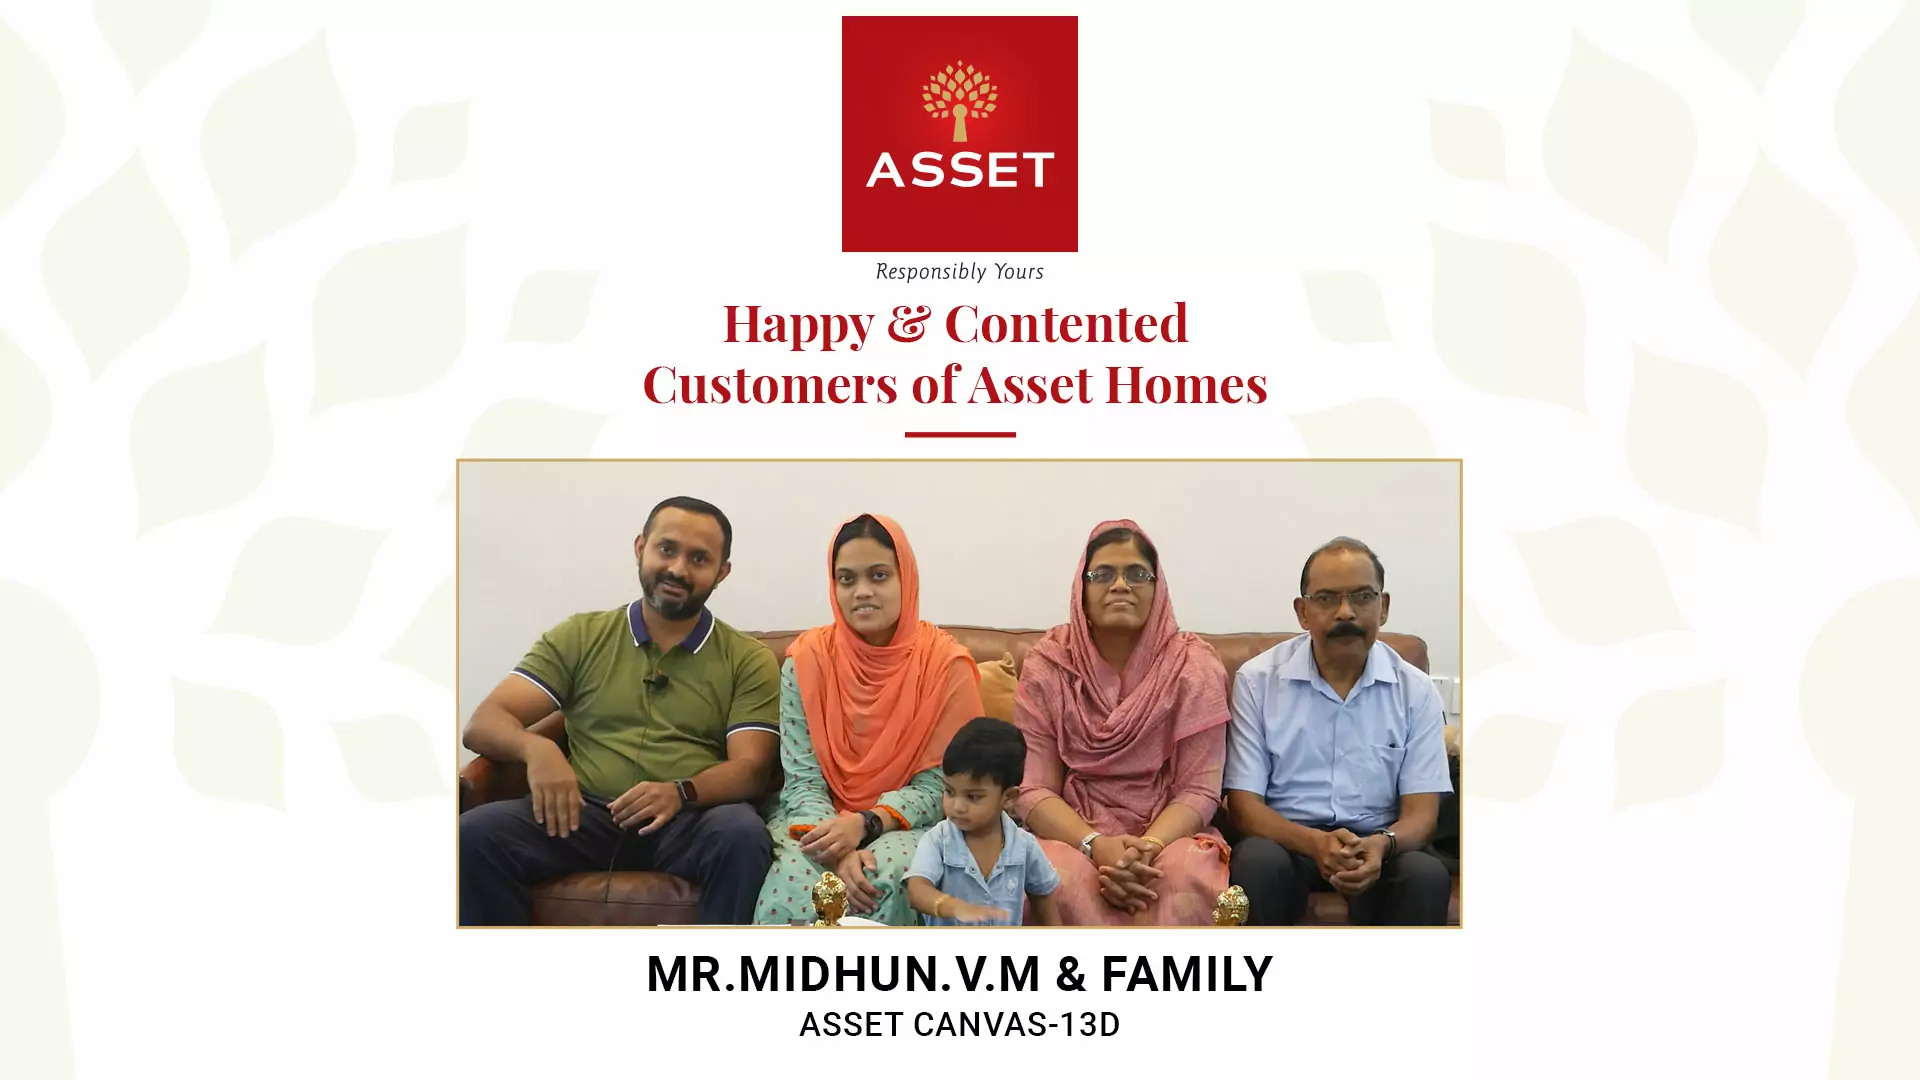 Mr. Midhun.V.M and Family: Asset Canvas